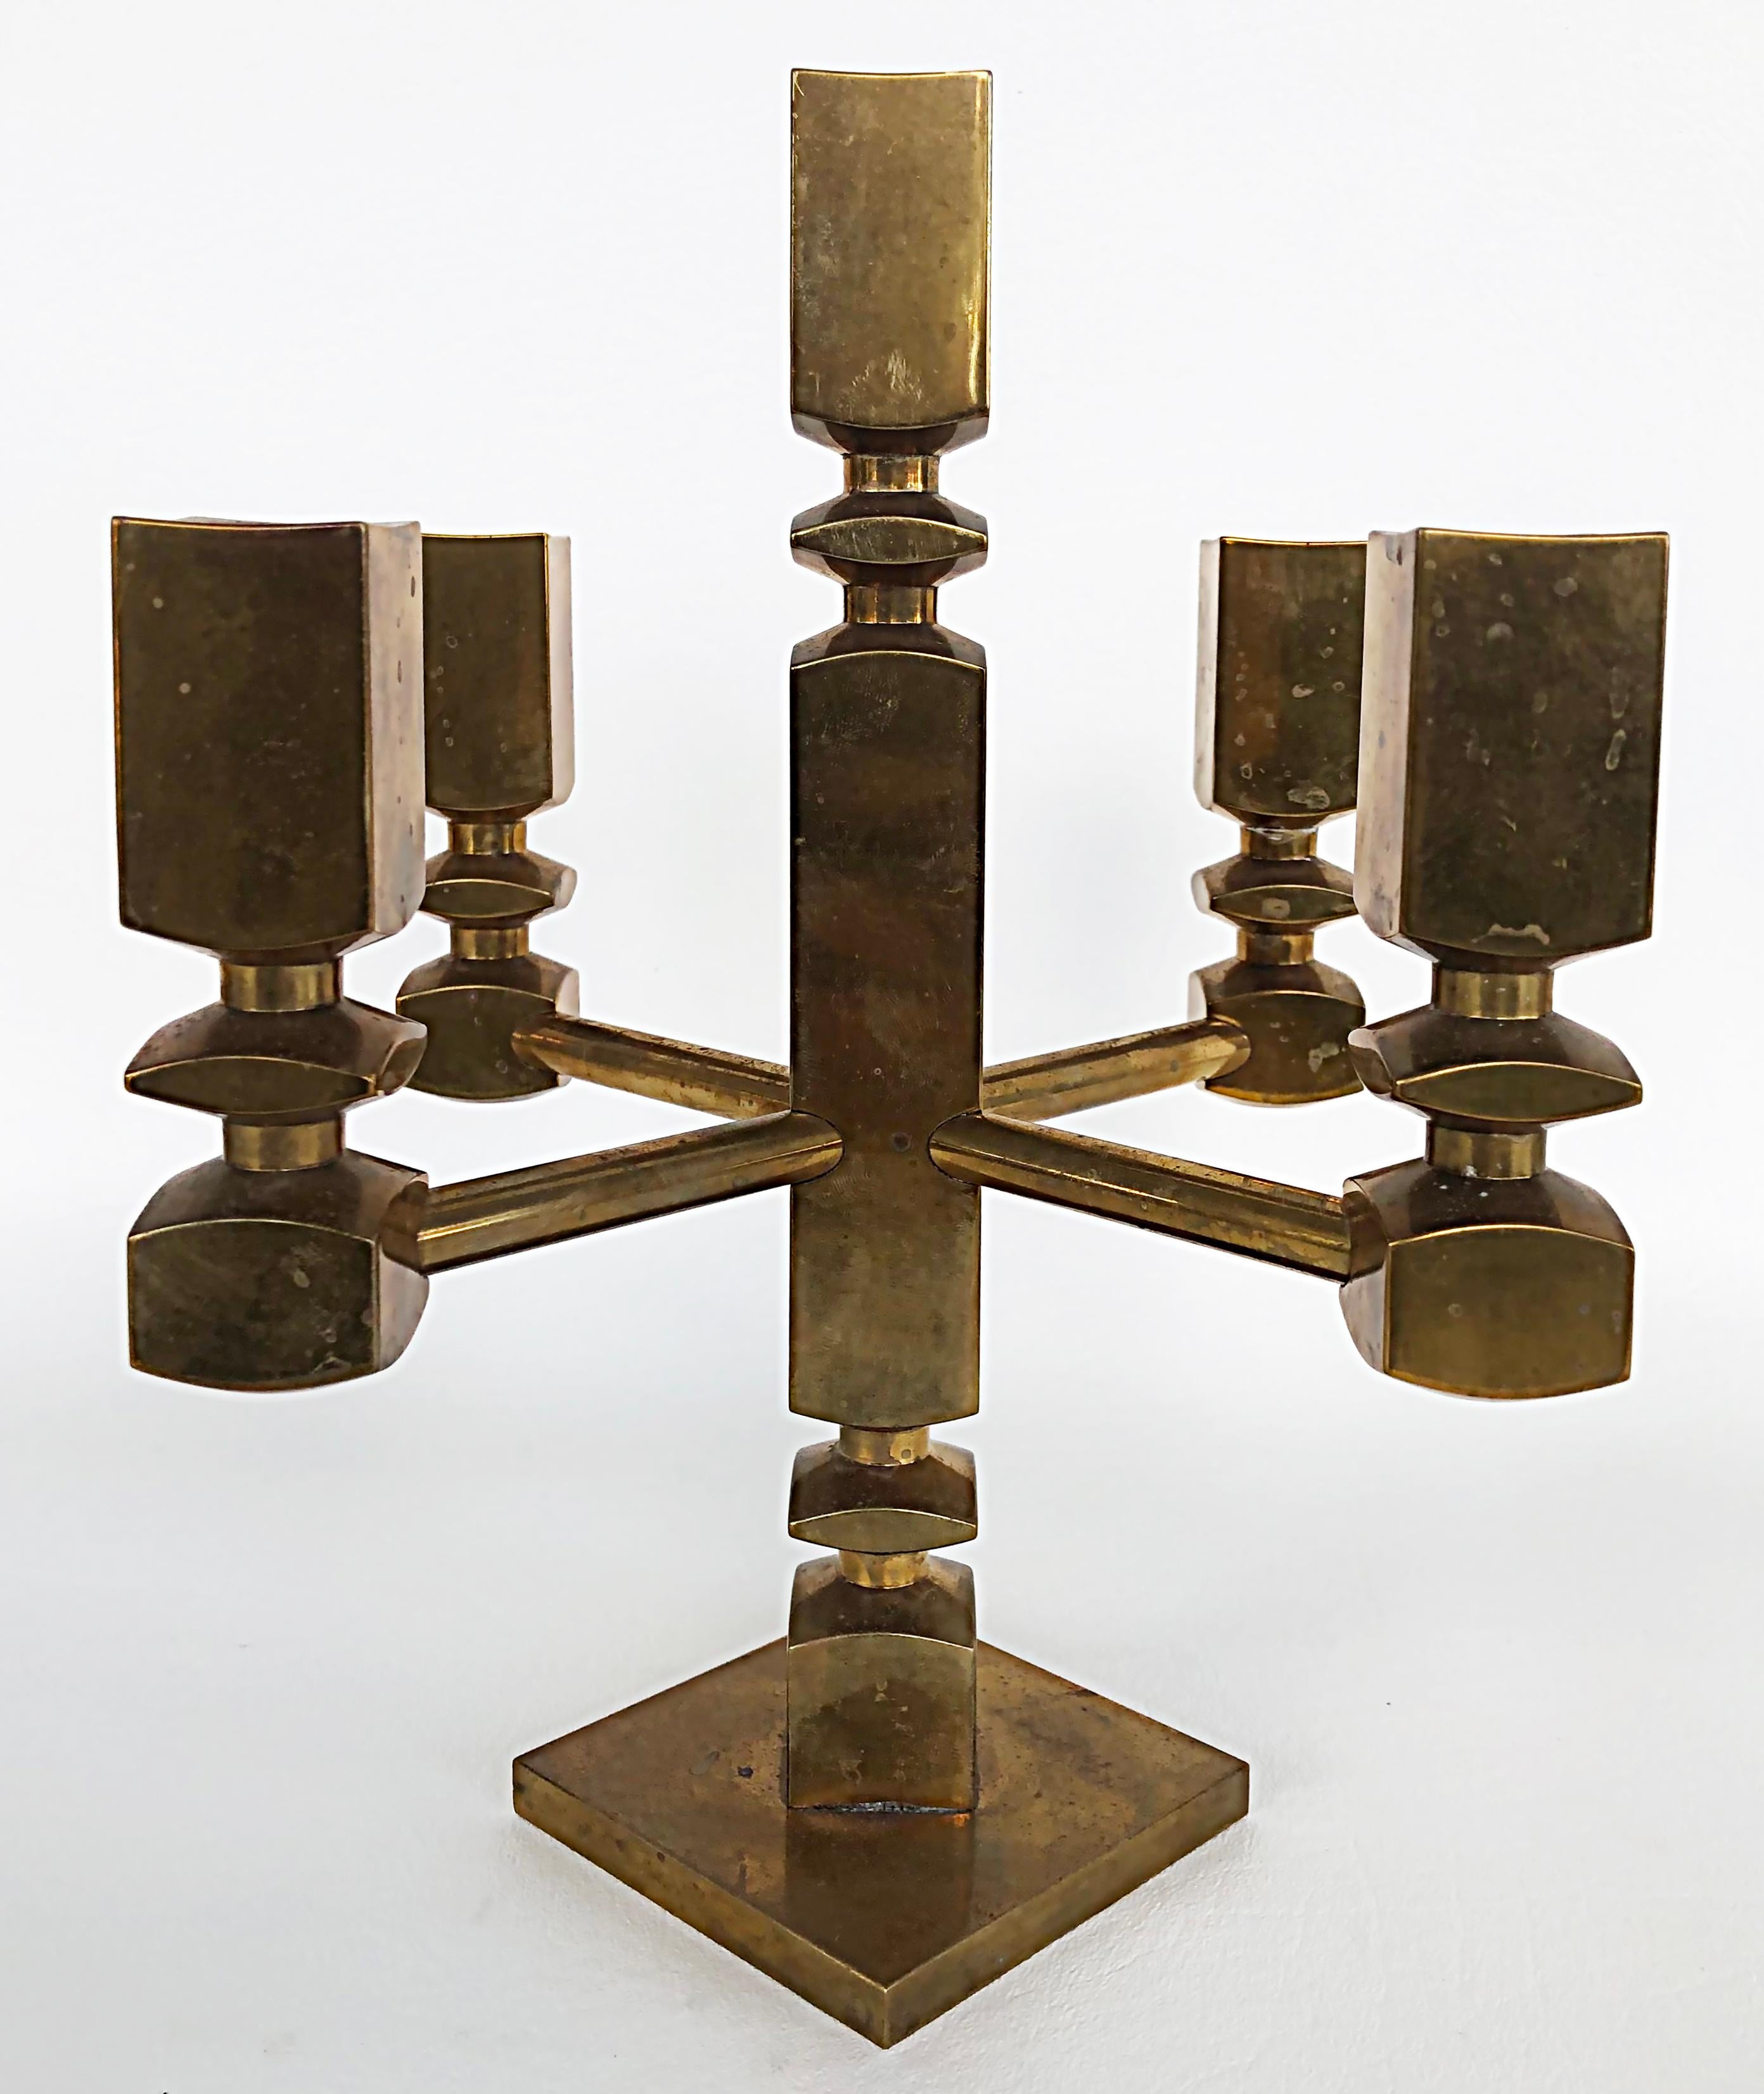 20th Century Lars Bergsten for Vallonmässing Sweden Brass Candelabra, Signed and Dated 1985